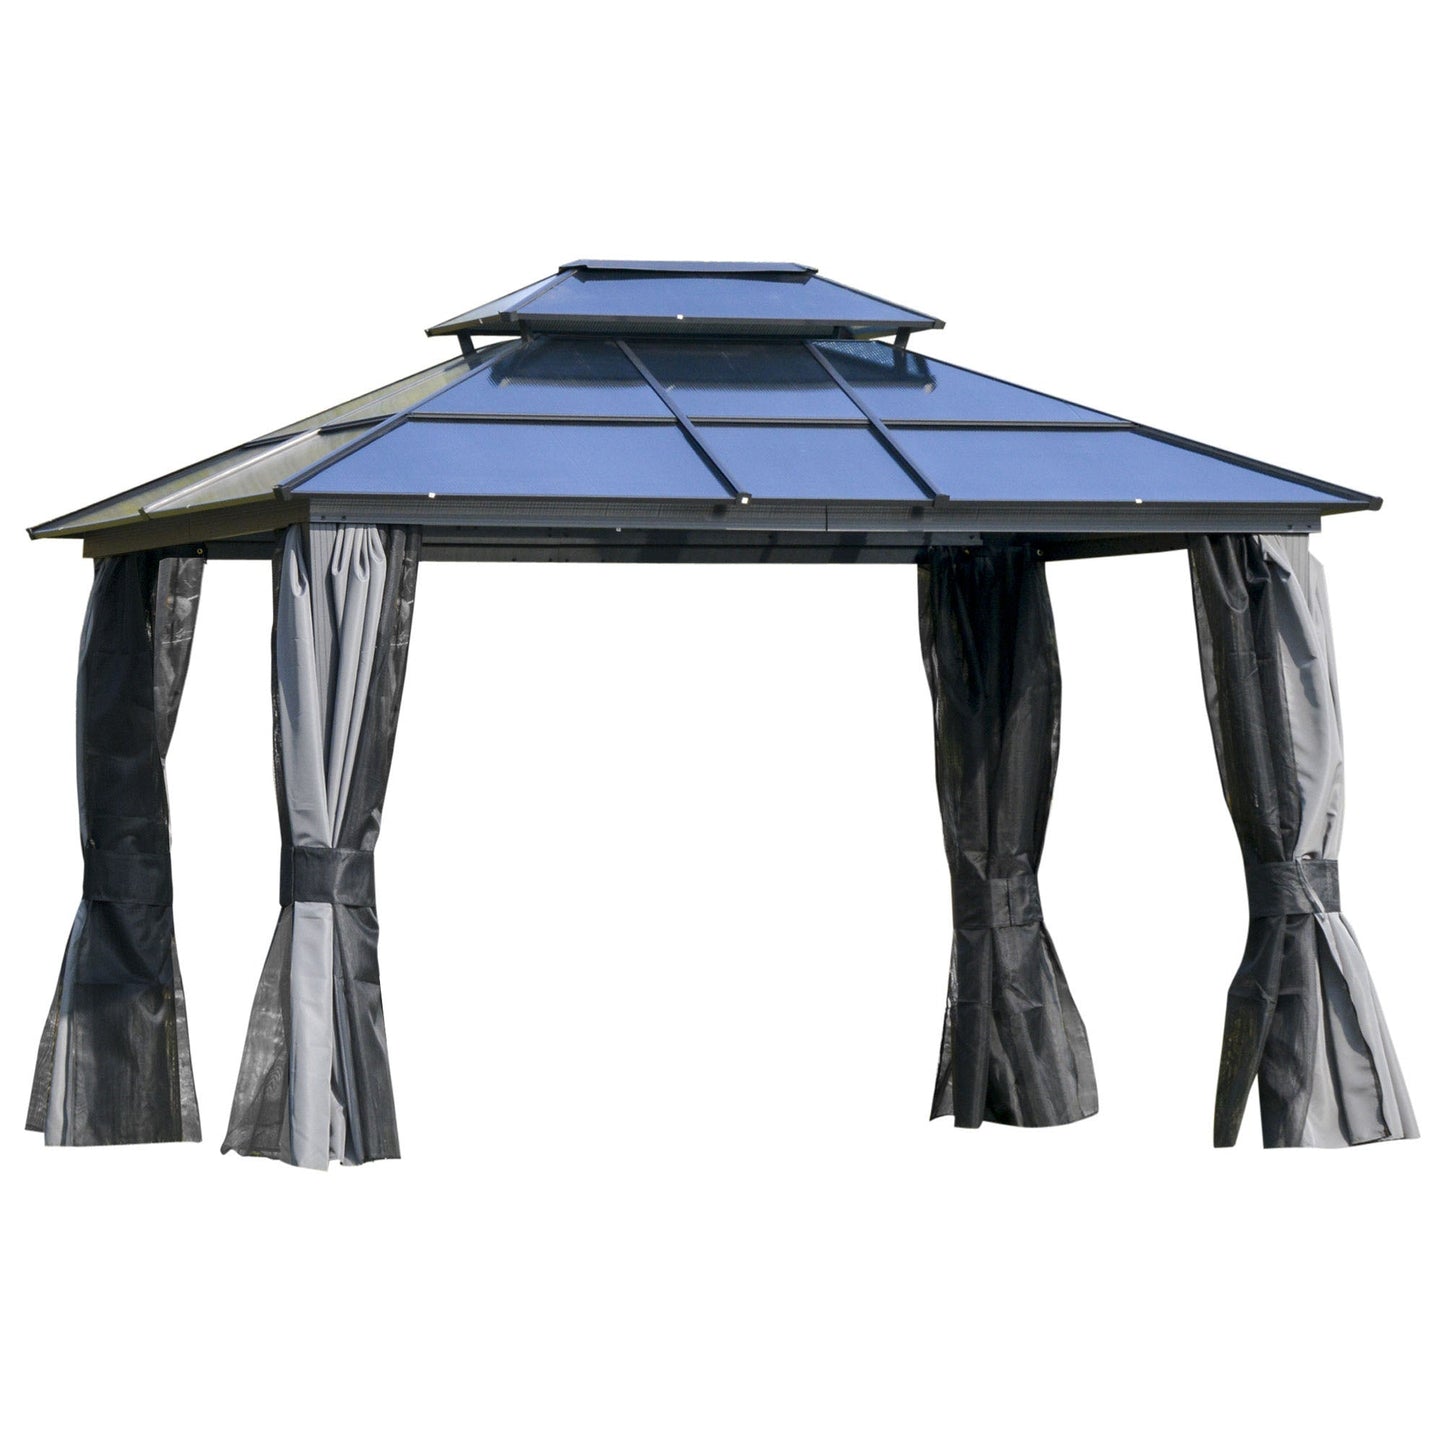 Outdoor and Garden-10x12 Hardtop Gazebo with Aluminum Frame, Polycarbonate Gazebo Canopy with Curtains, Netting for Garden, Patio, Backyard, Grey - Outdoor Style Company